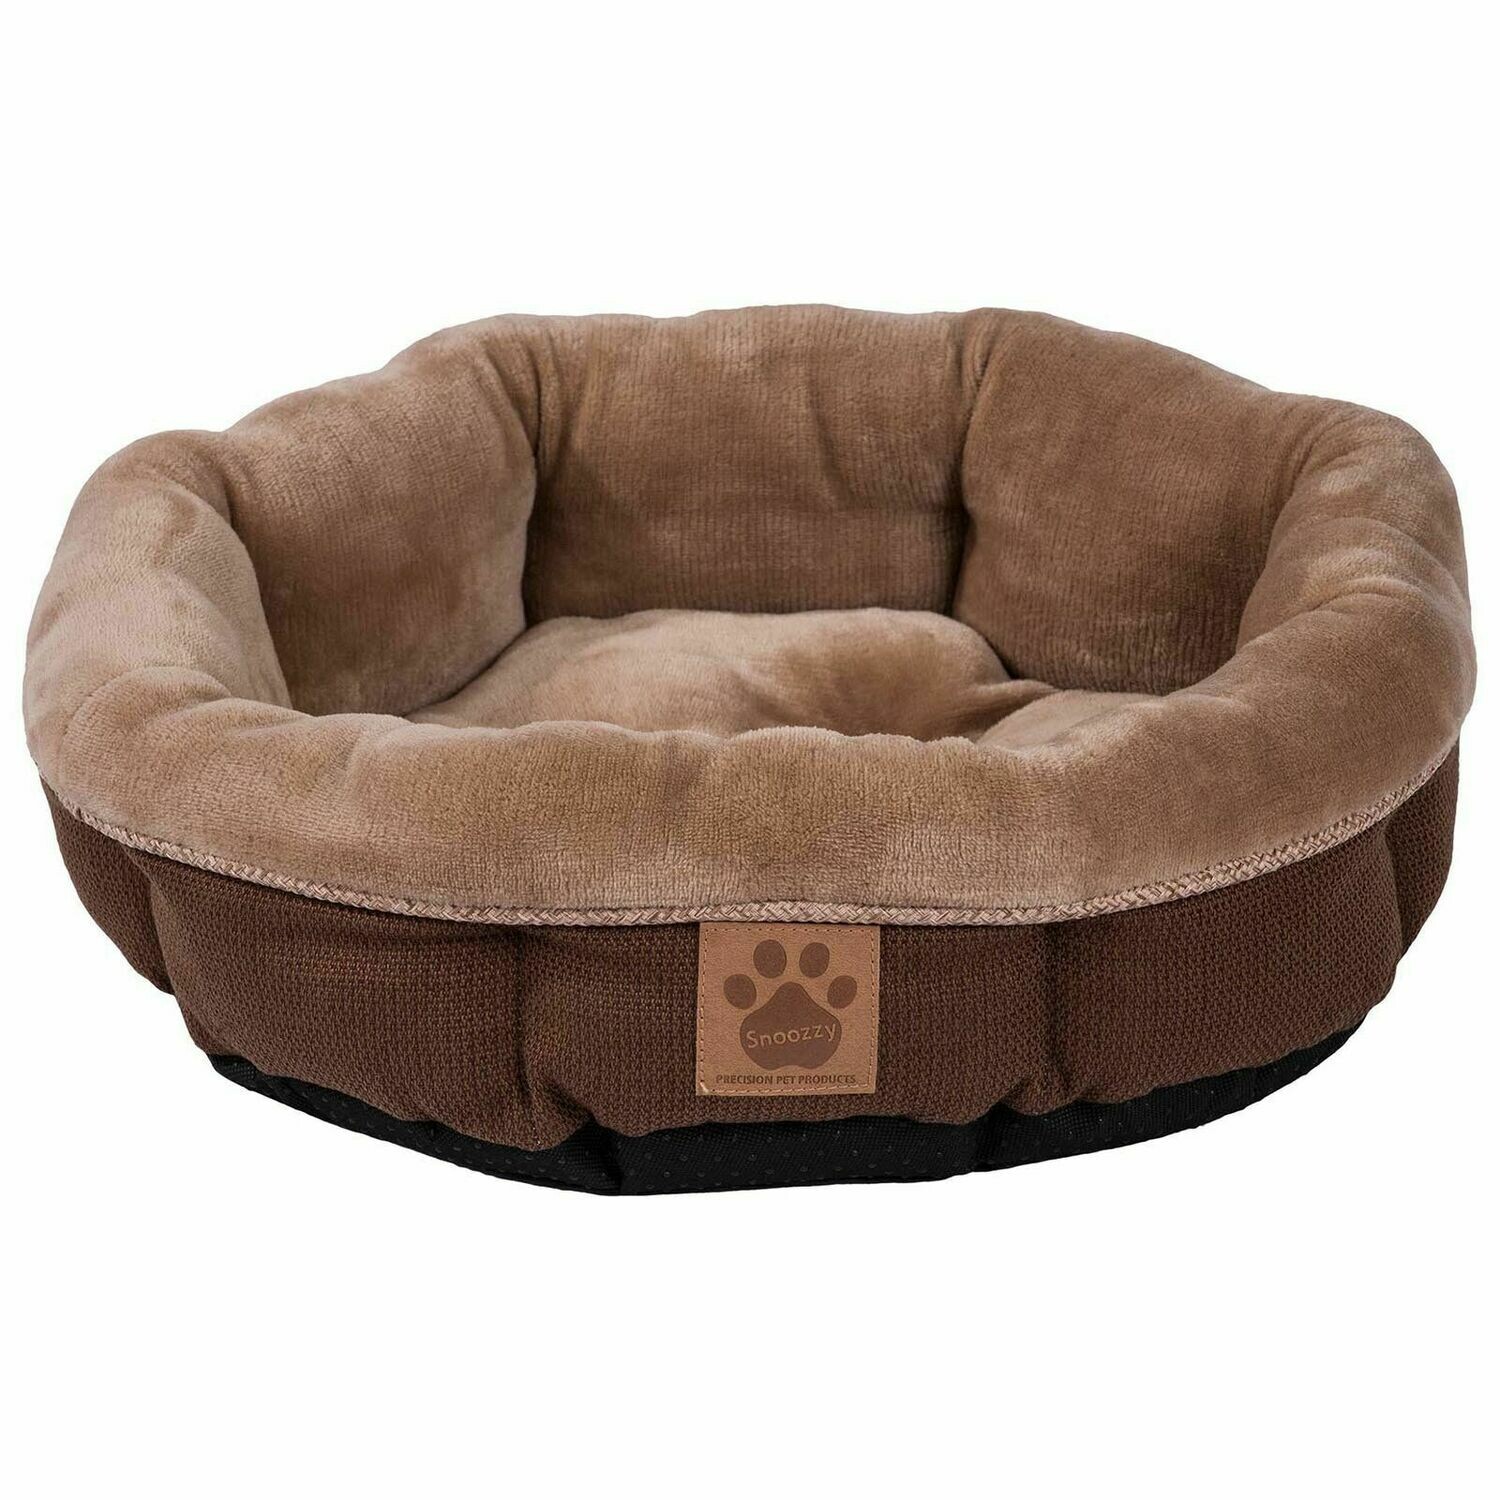 SNOOZZY RUSTIC ELEGANCE ROUND SHEARLING BED BROWN 17X4.5IN.